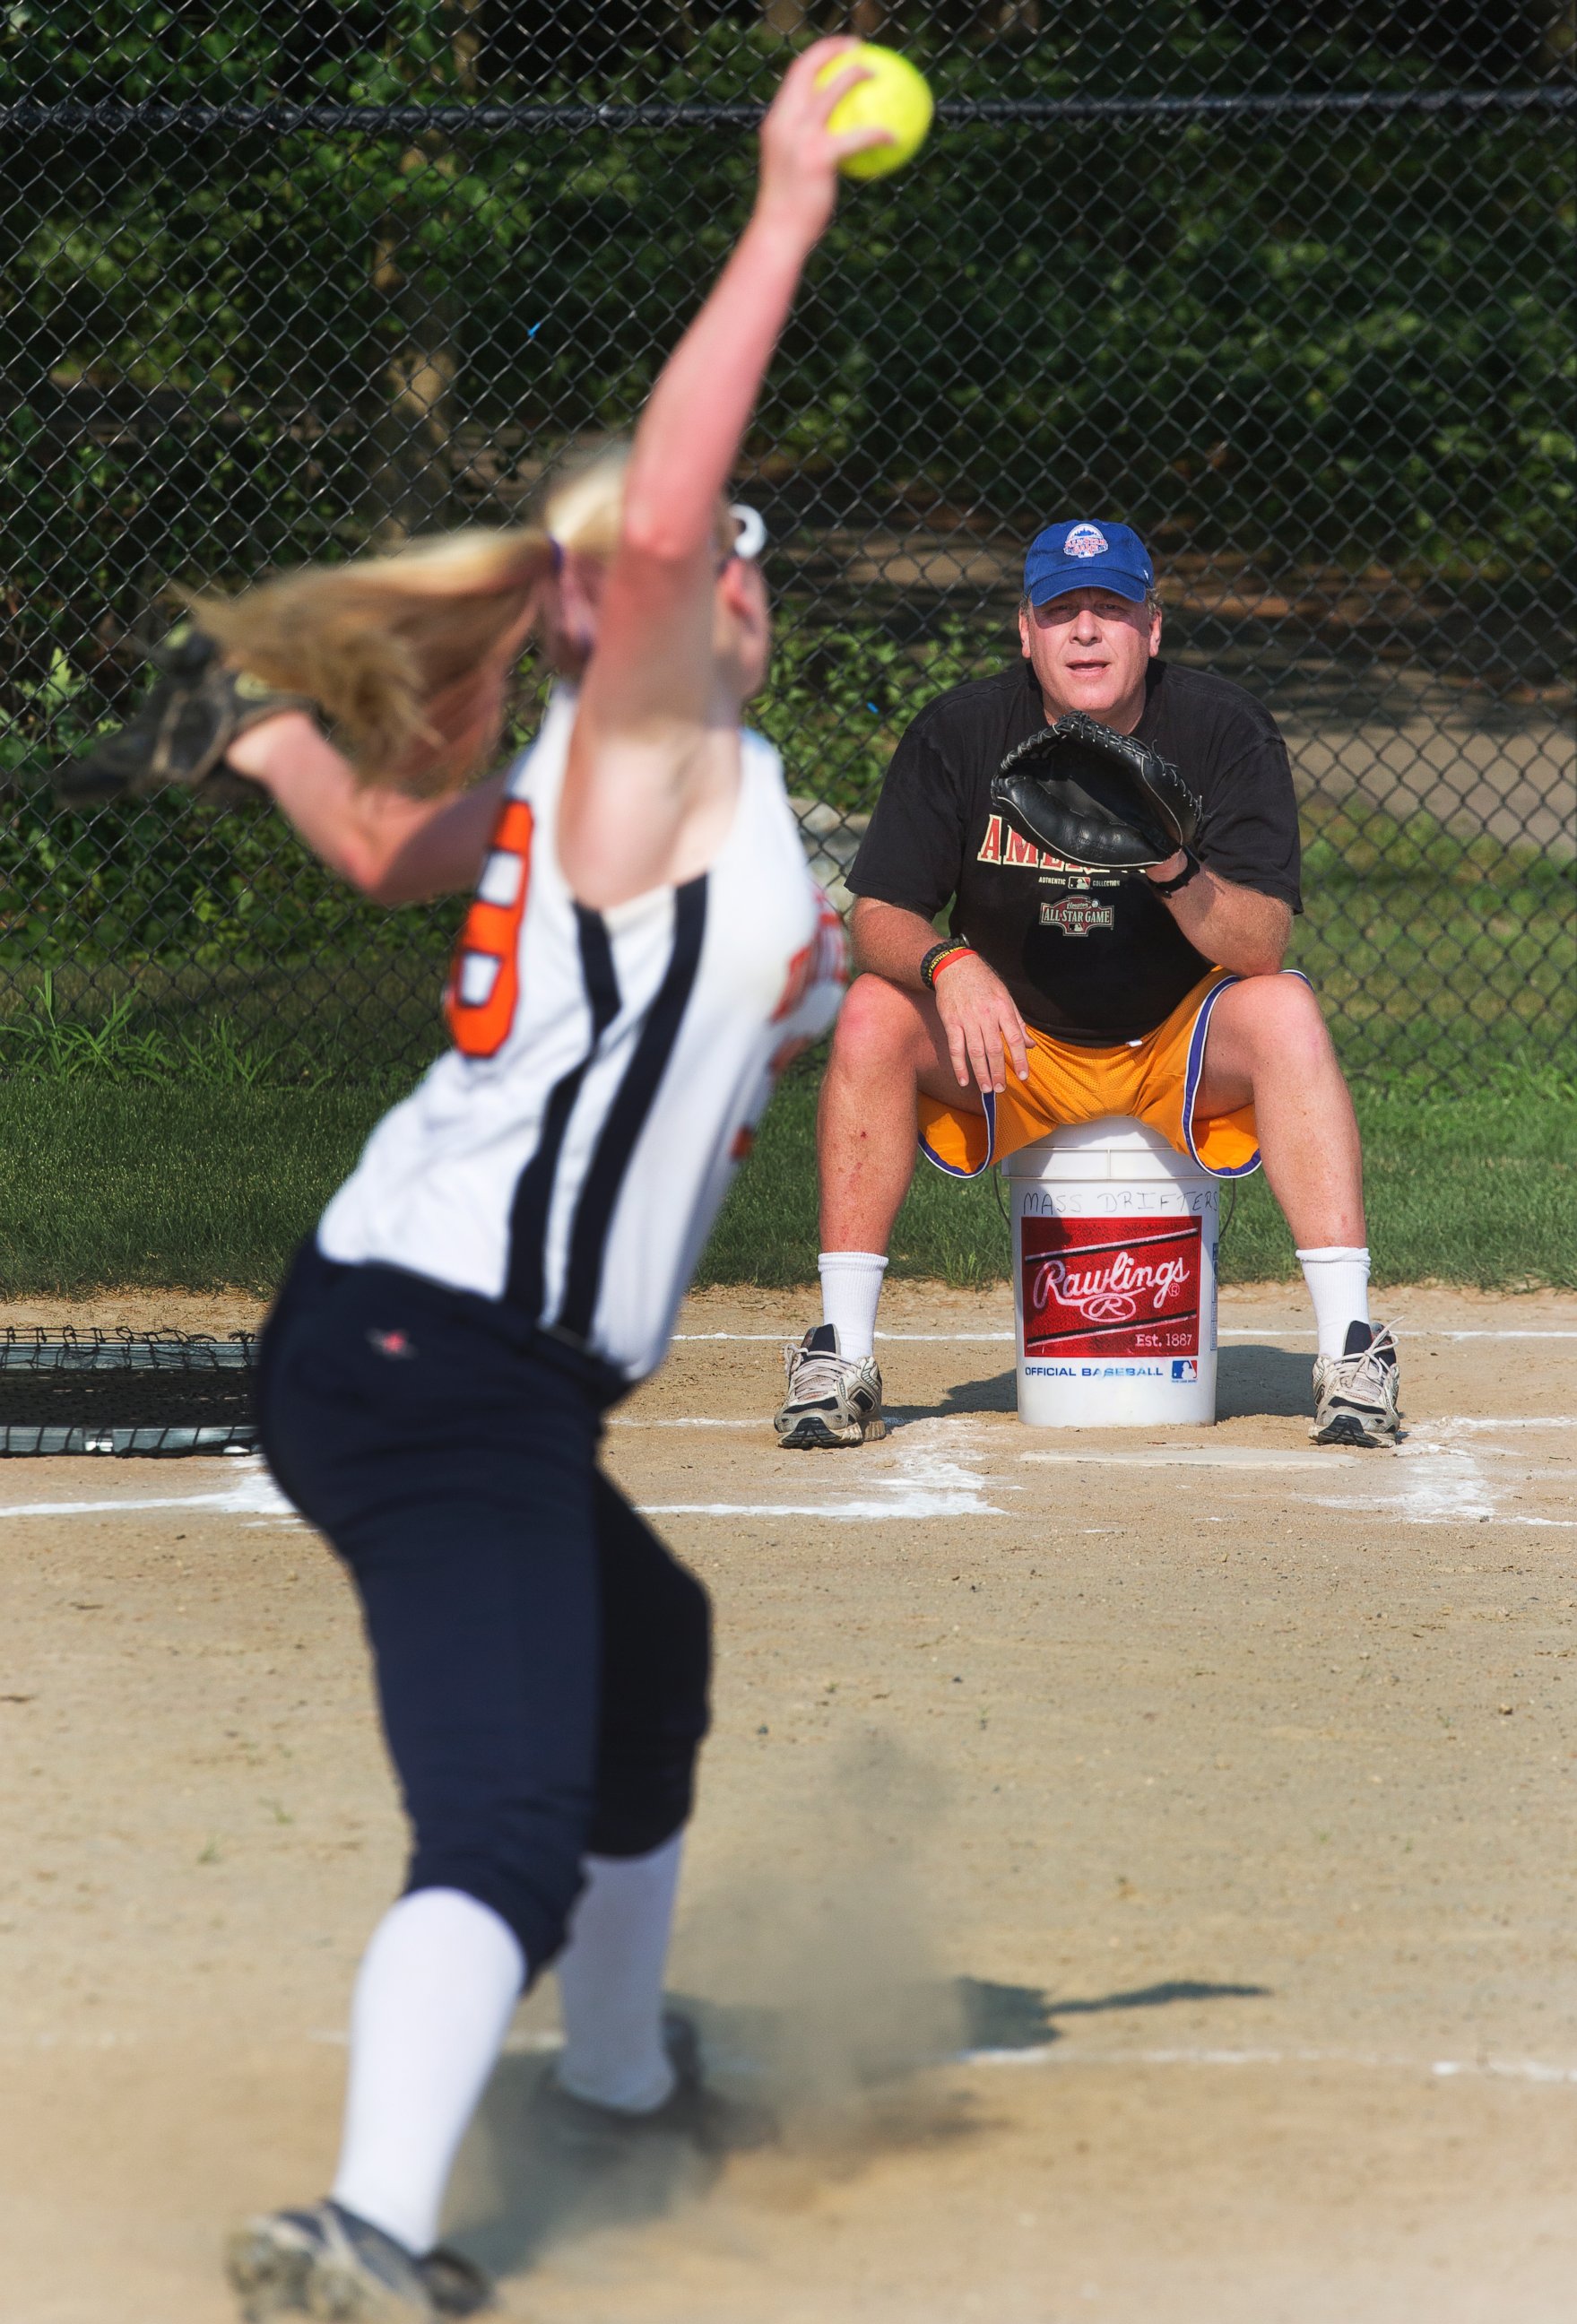 PHOTO: Curt Schilling, coach of the Drifters, a 16-and-under girls softball team, catches his daughter Gabby at Shonda Schilling Field in Medfield, Ma. on July 19, 2013.